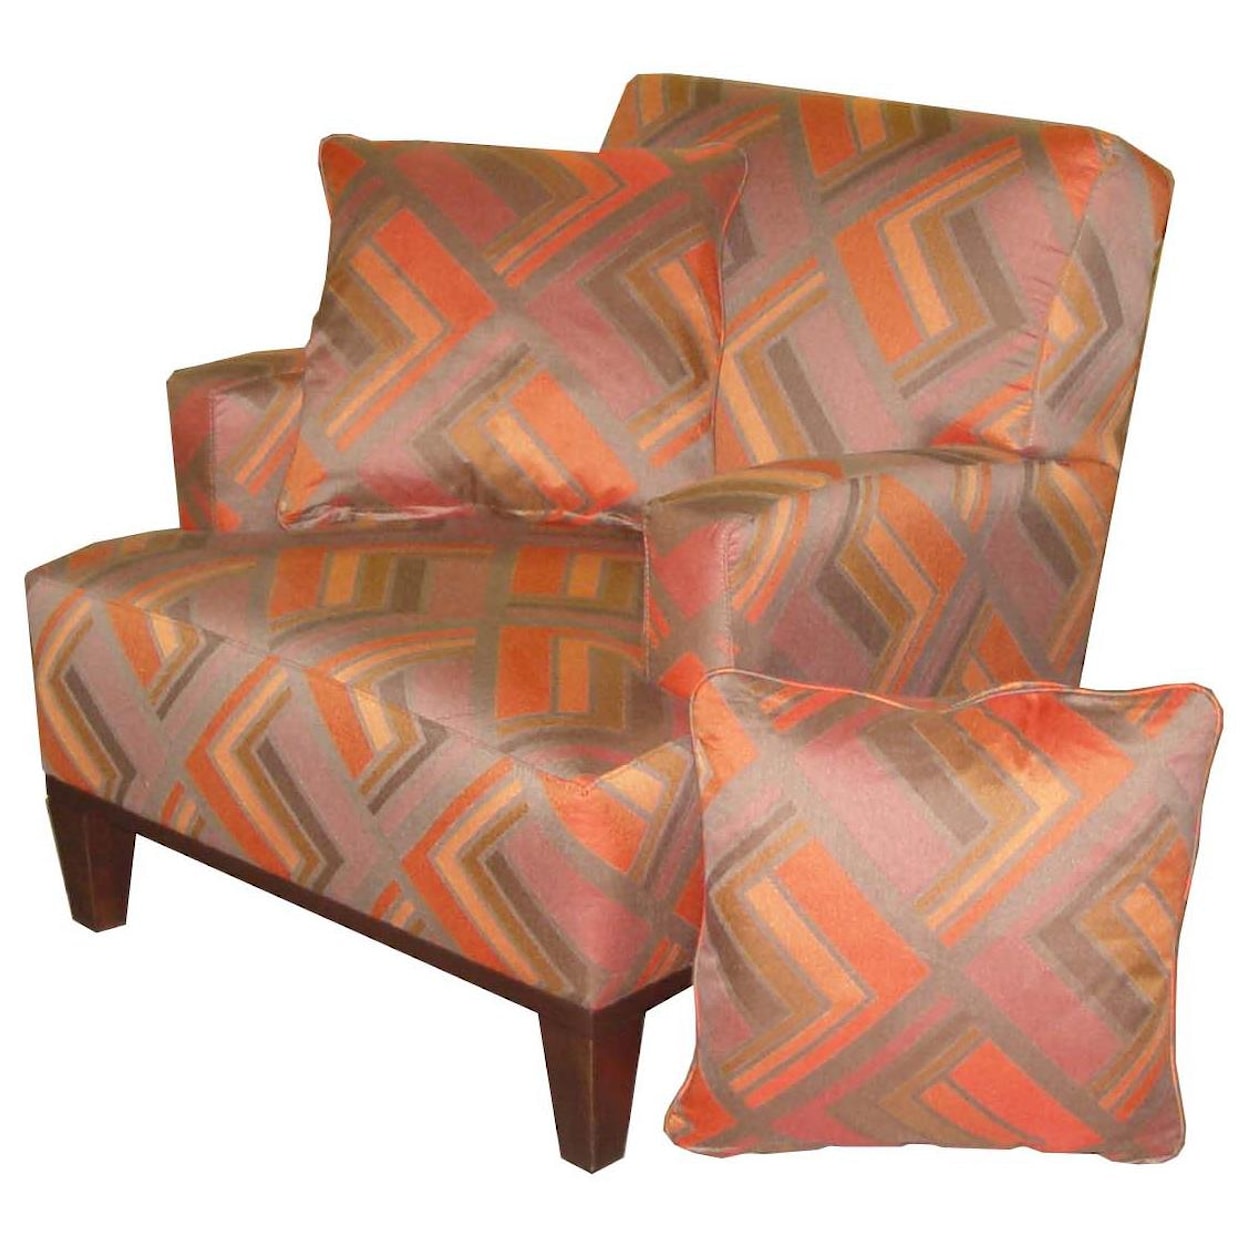 Jonathan Louis Choices - Orion Accent Chair